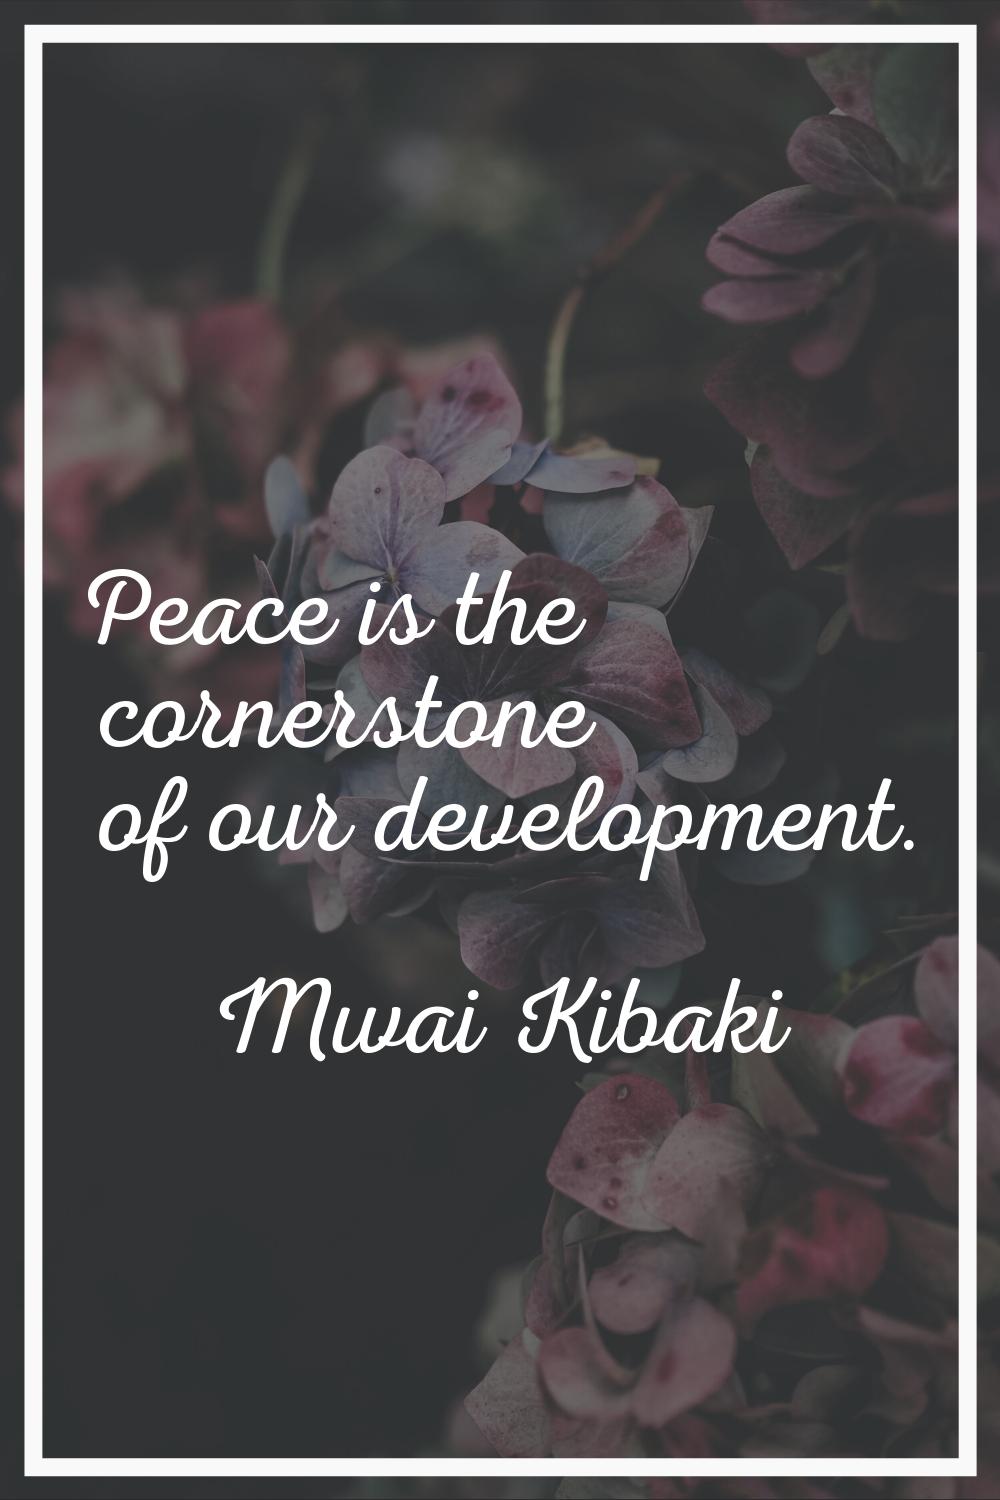 Peace is the cornerstone of our development.